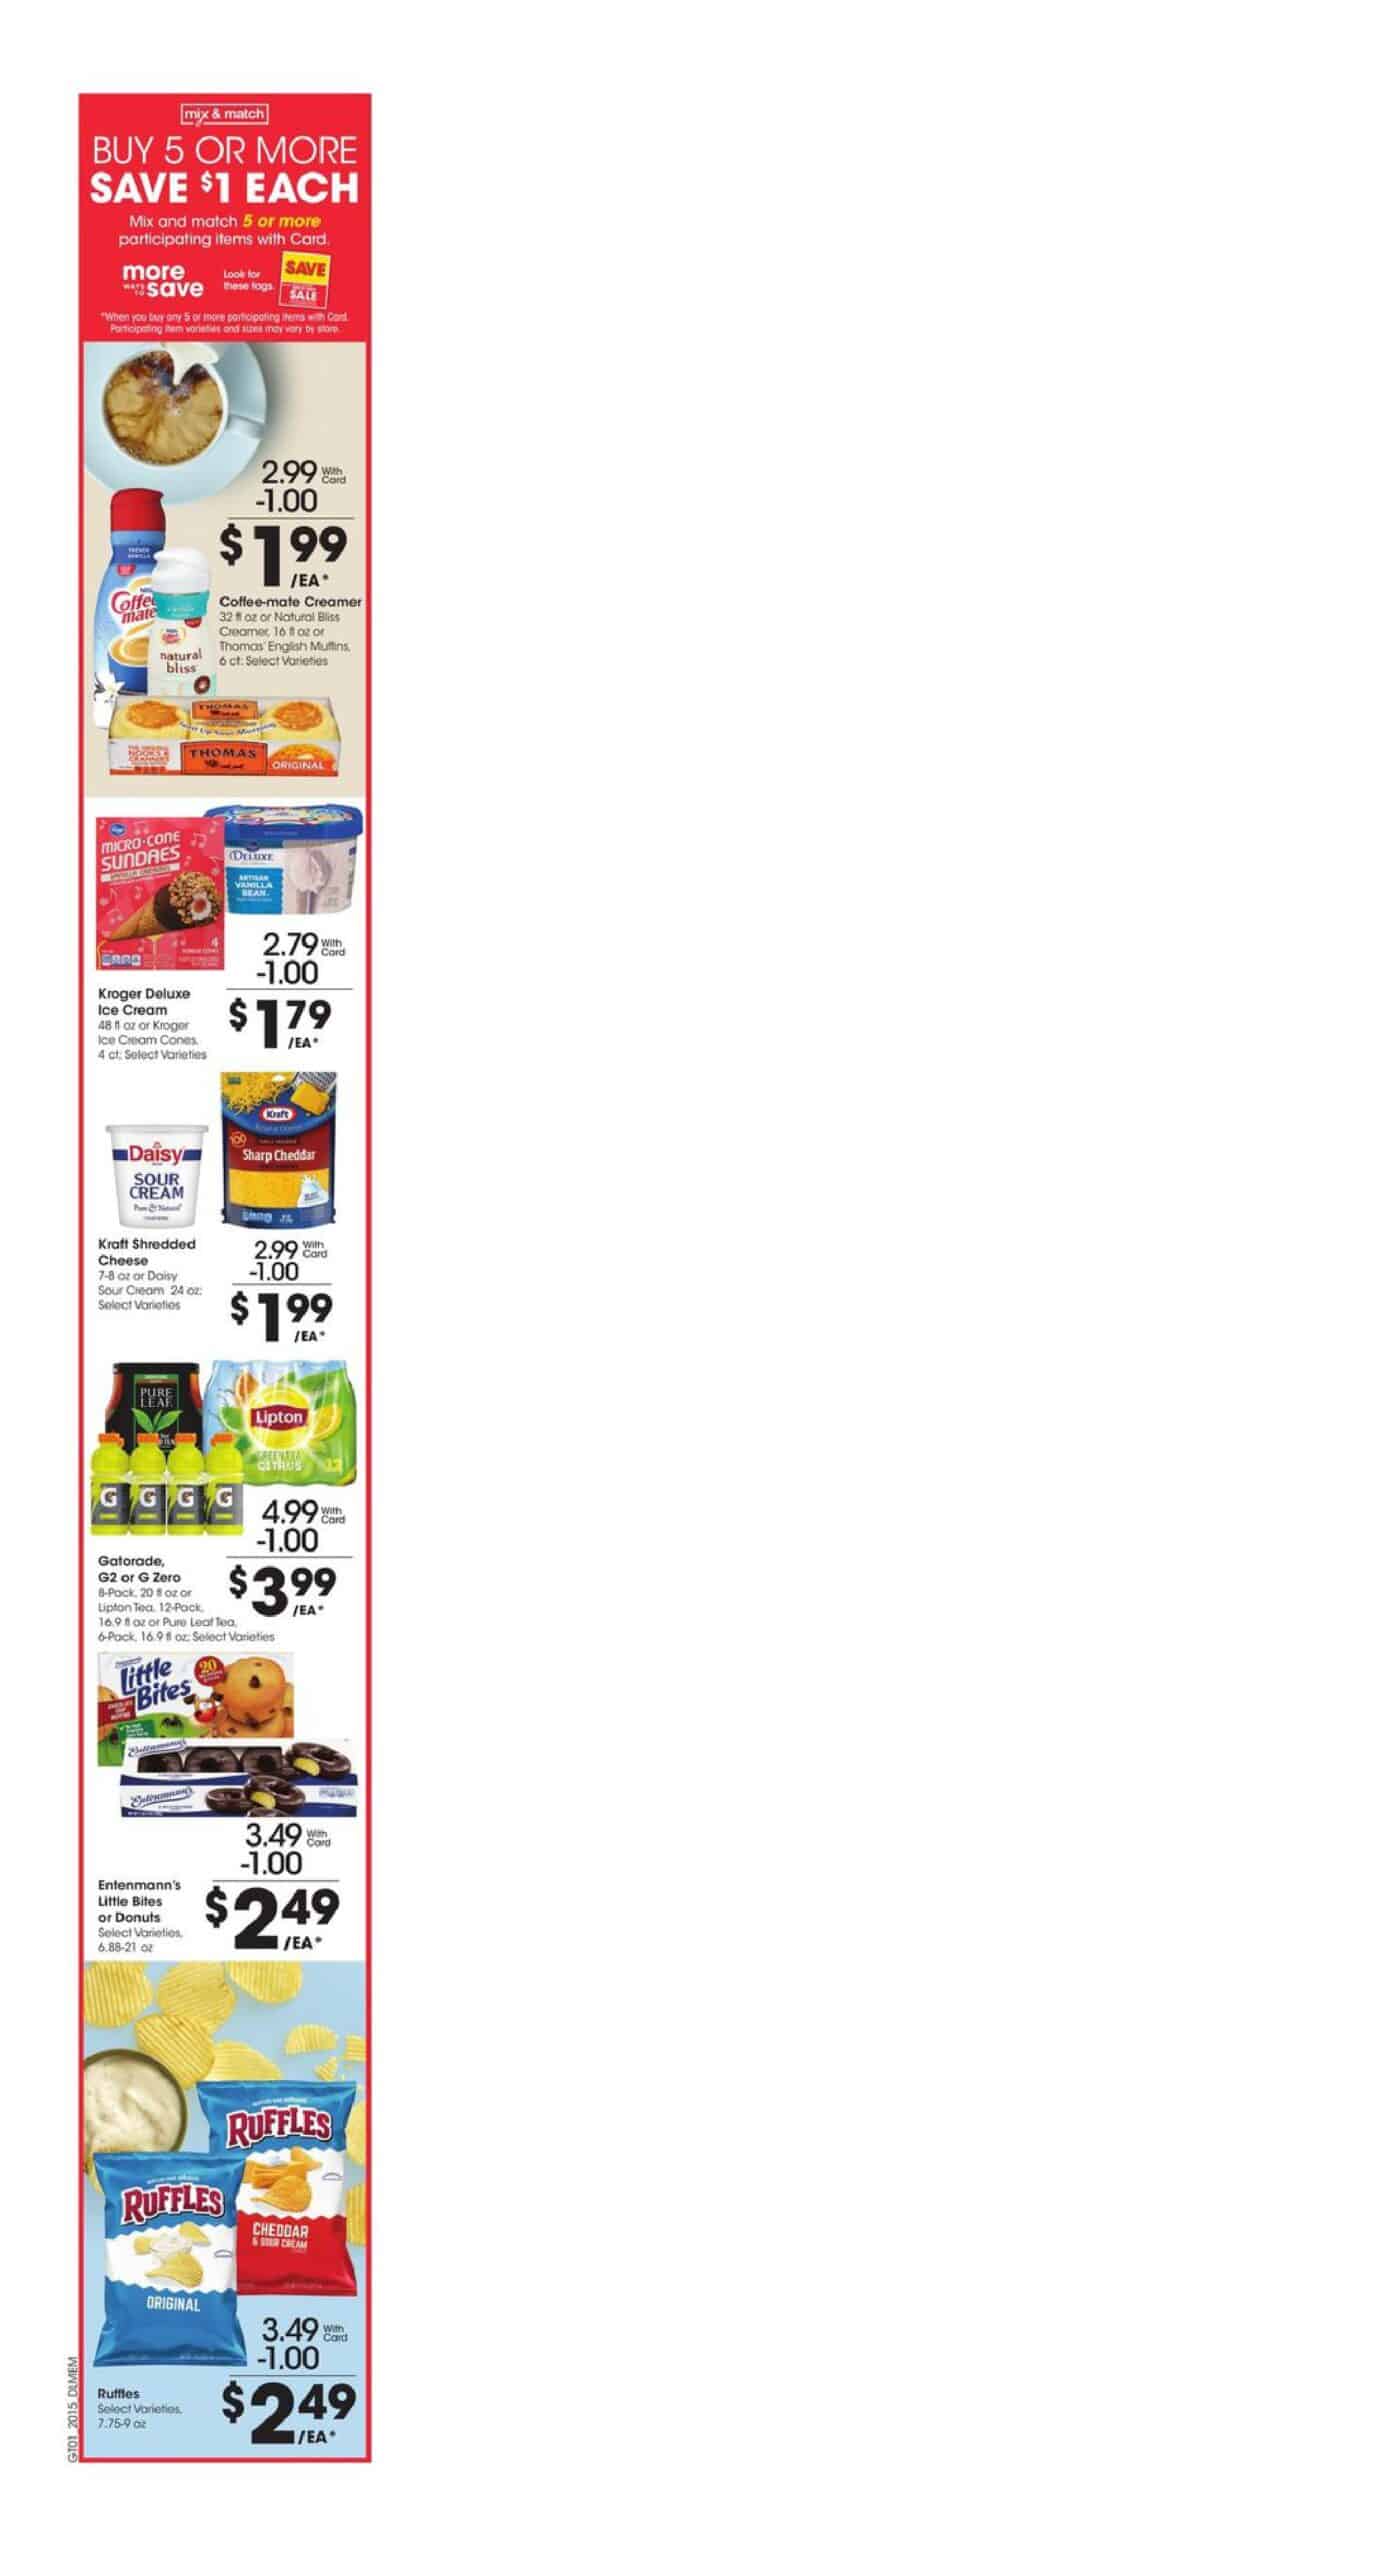 Kroger Weekly Ad Scan for 05/13/20 – 05/19/2020